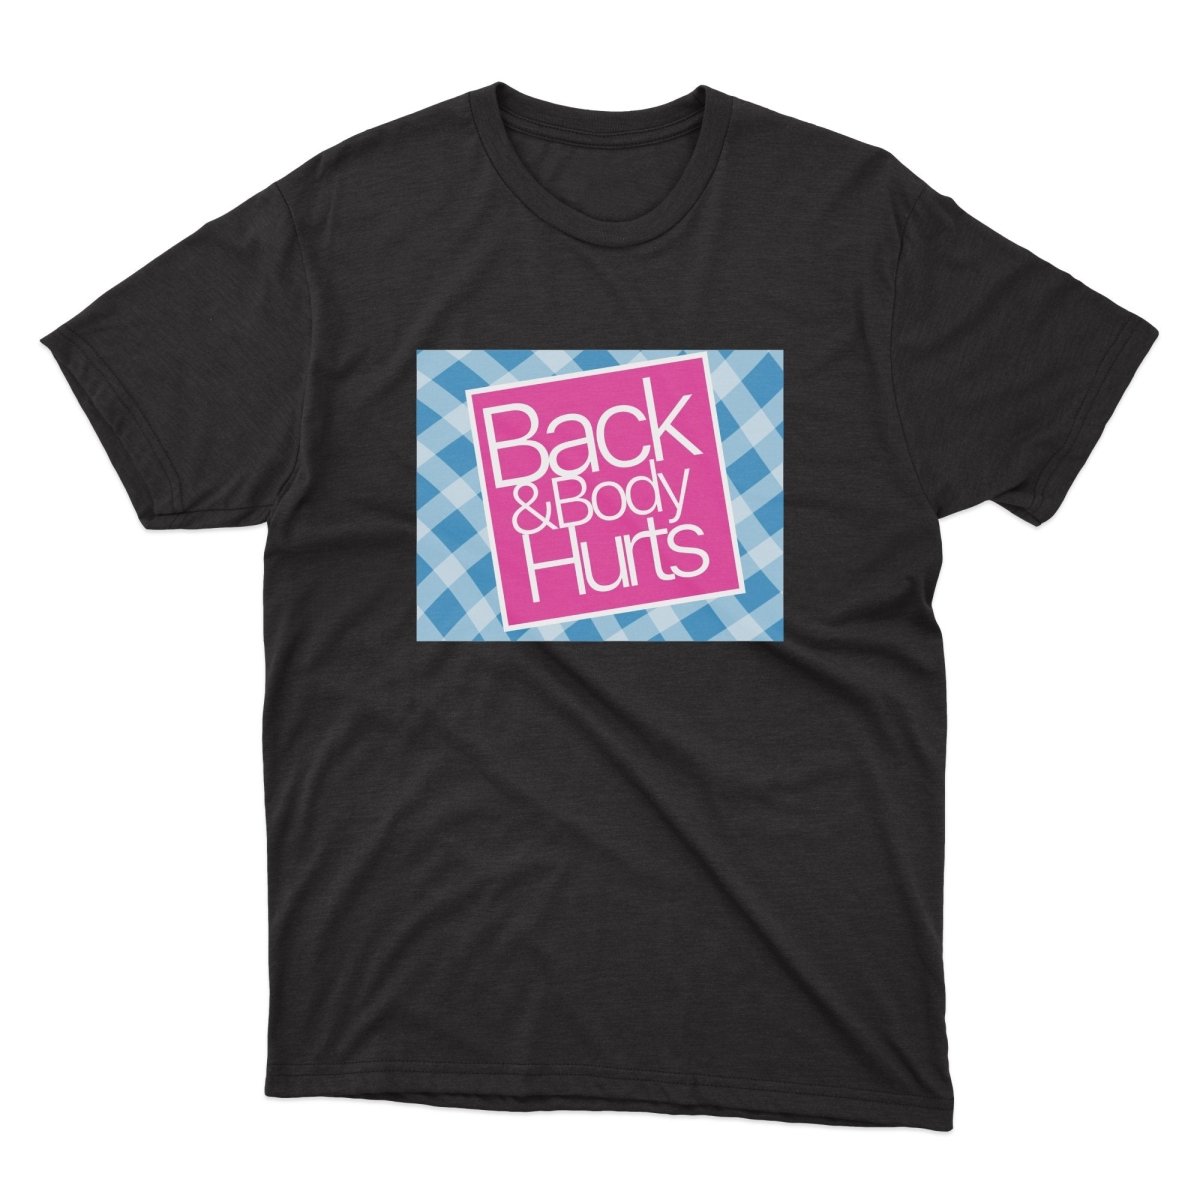 Back And Body Hurts Shirt - stickerbullBack And Body Hurts ShirtShirtsPrintifystickerbull29248685498792369916BlackSa black t - shirt with the words back and body hurts on it